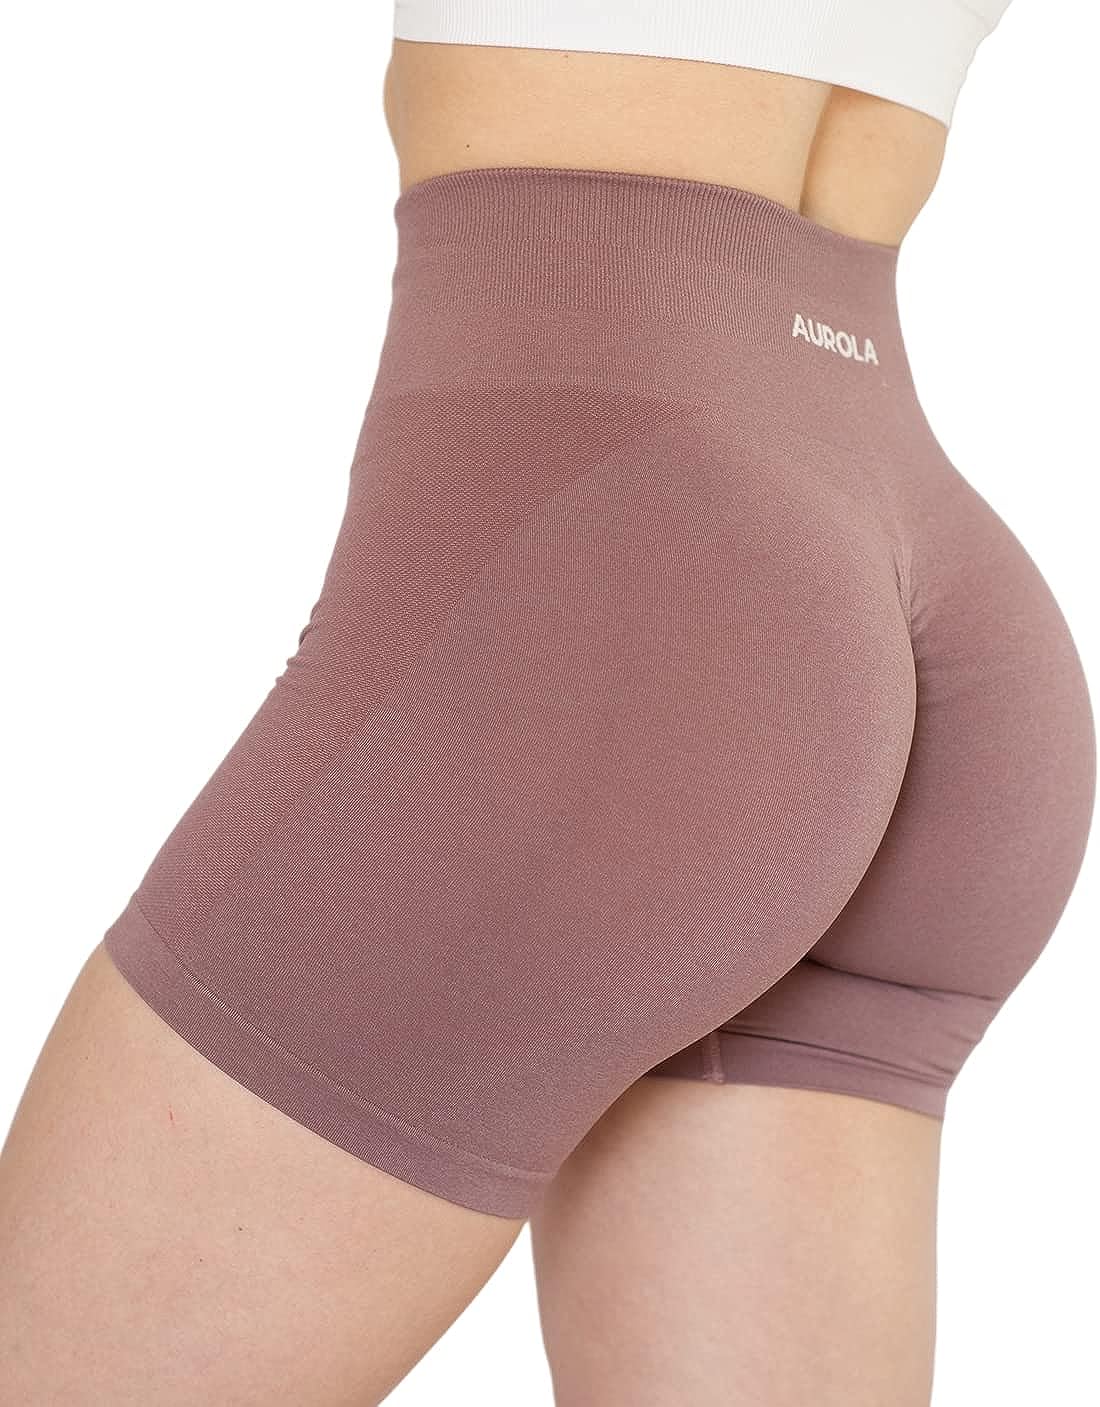 Intensify Workout Shorts for Women Seamless Scrunch Short Gym Yoga Running Sport Active Exercise Fitness Shorts